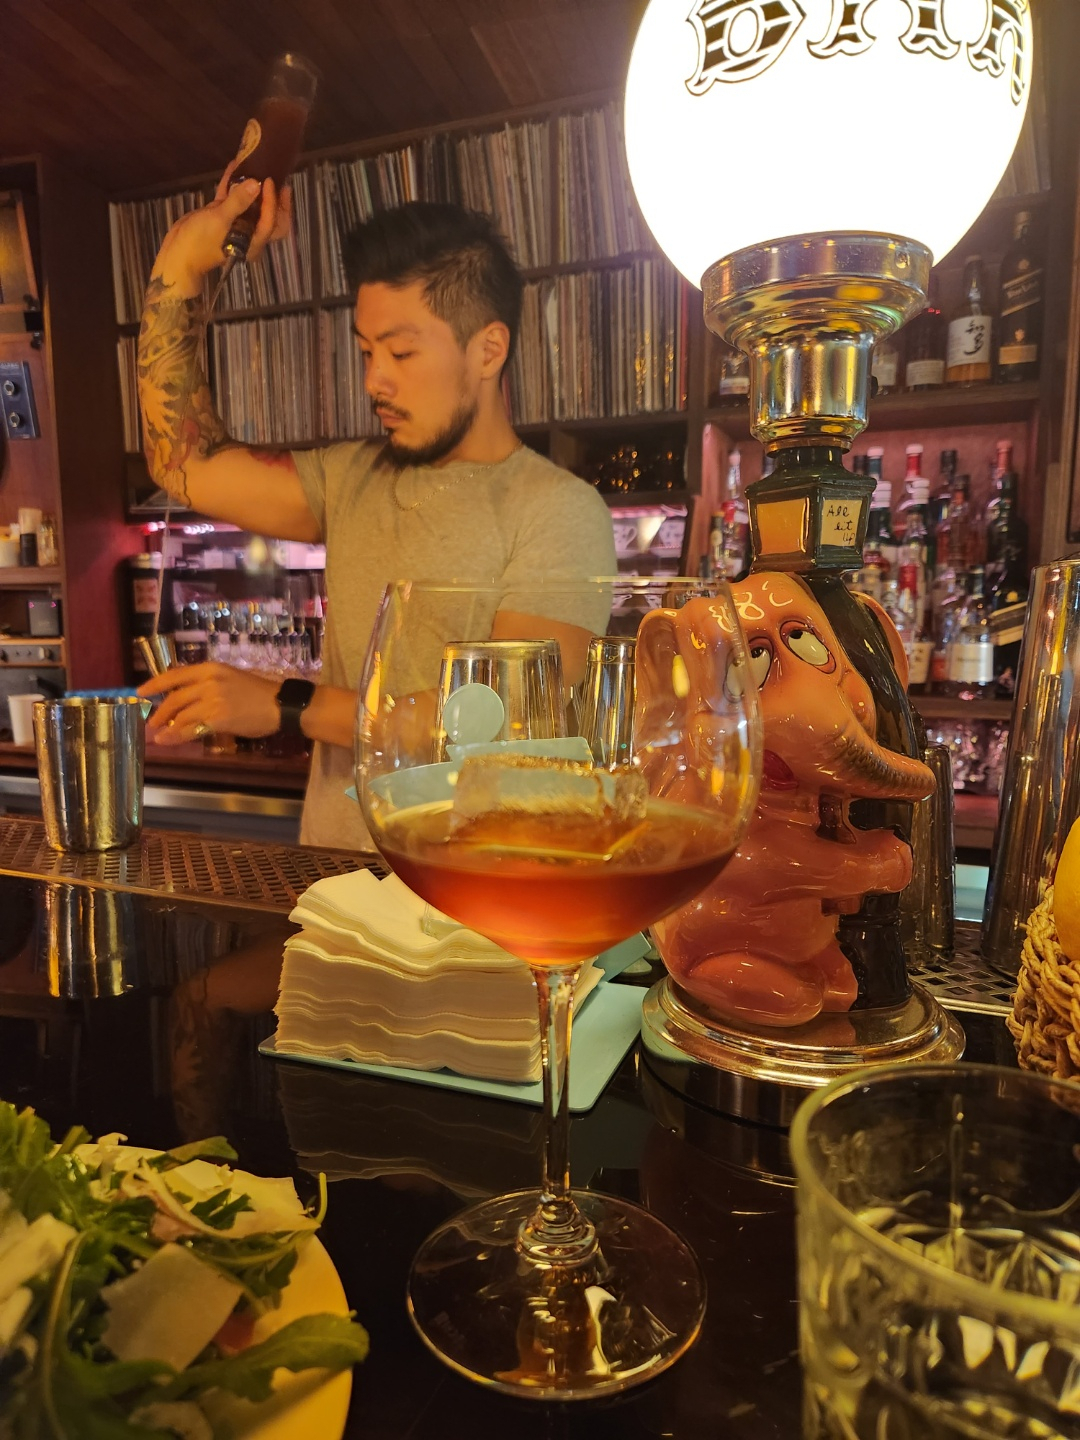 Hills and Europa's Cigar in a Glass cocktail (Song Seung-hyun/The Korea Herald)